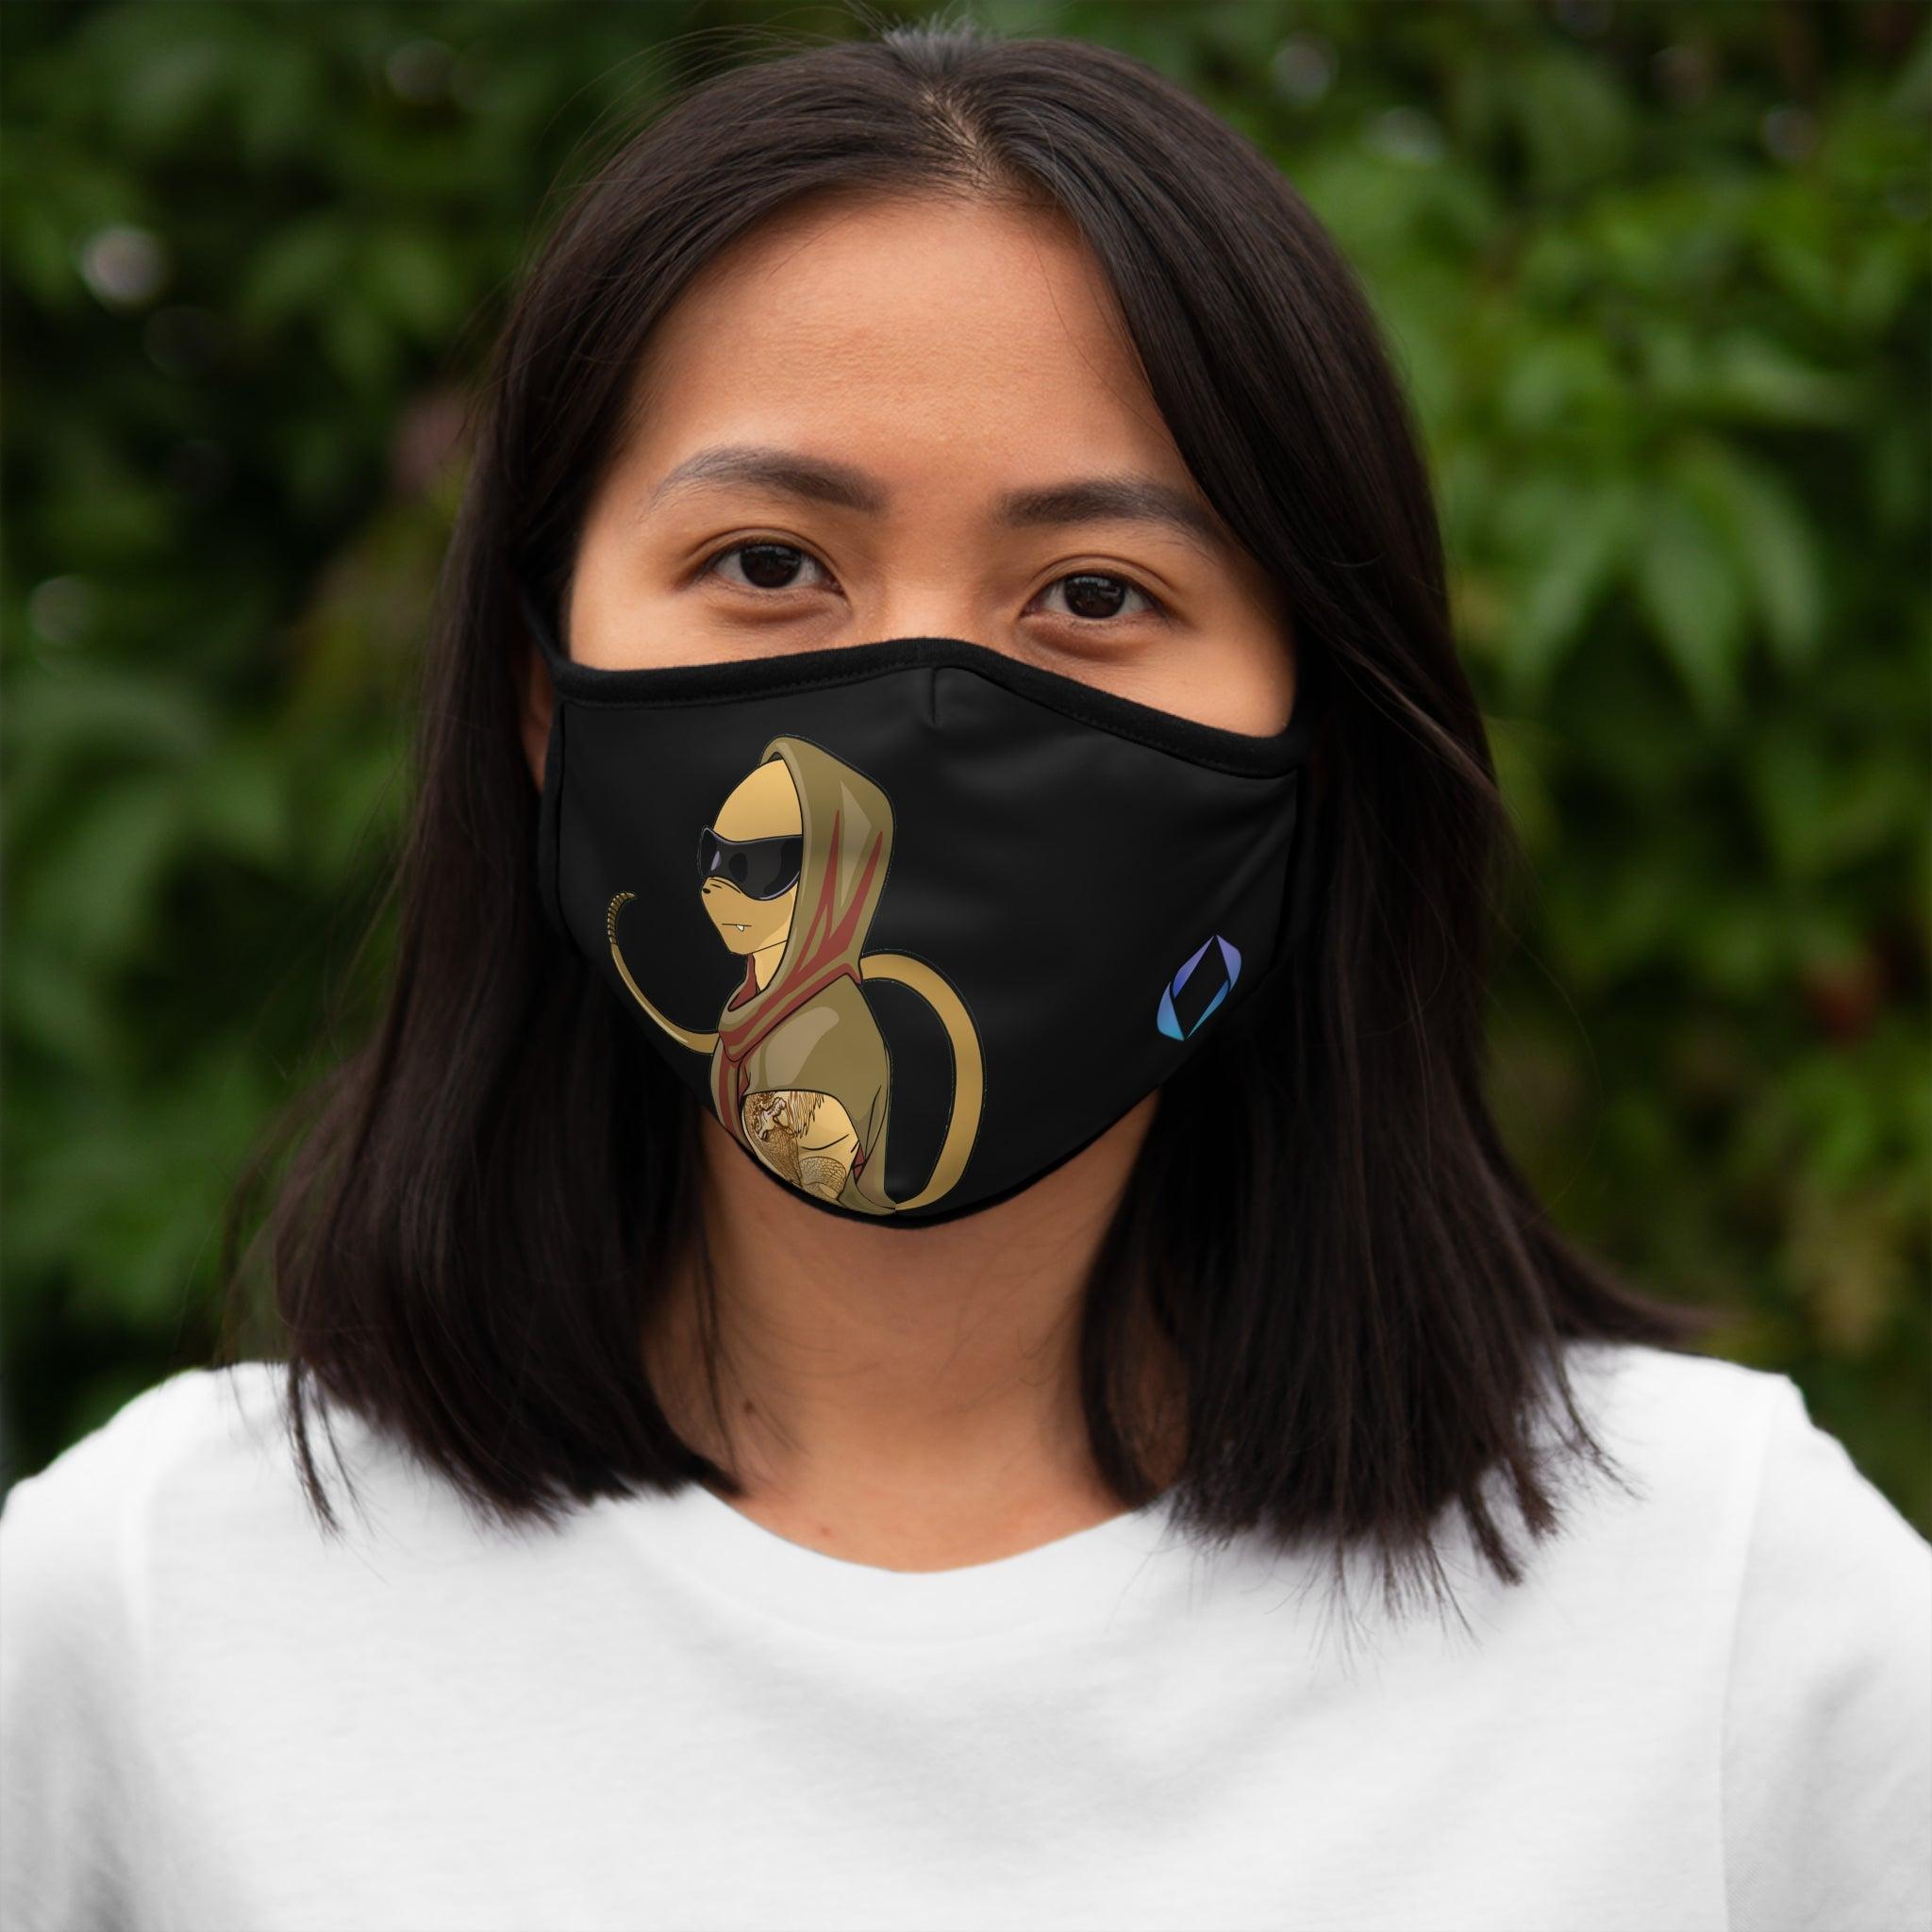 Hood Rats #157 ETH Personalized Face Mask - 13036203172140477715_2048